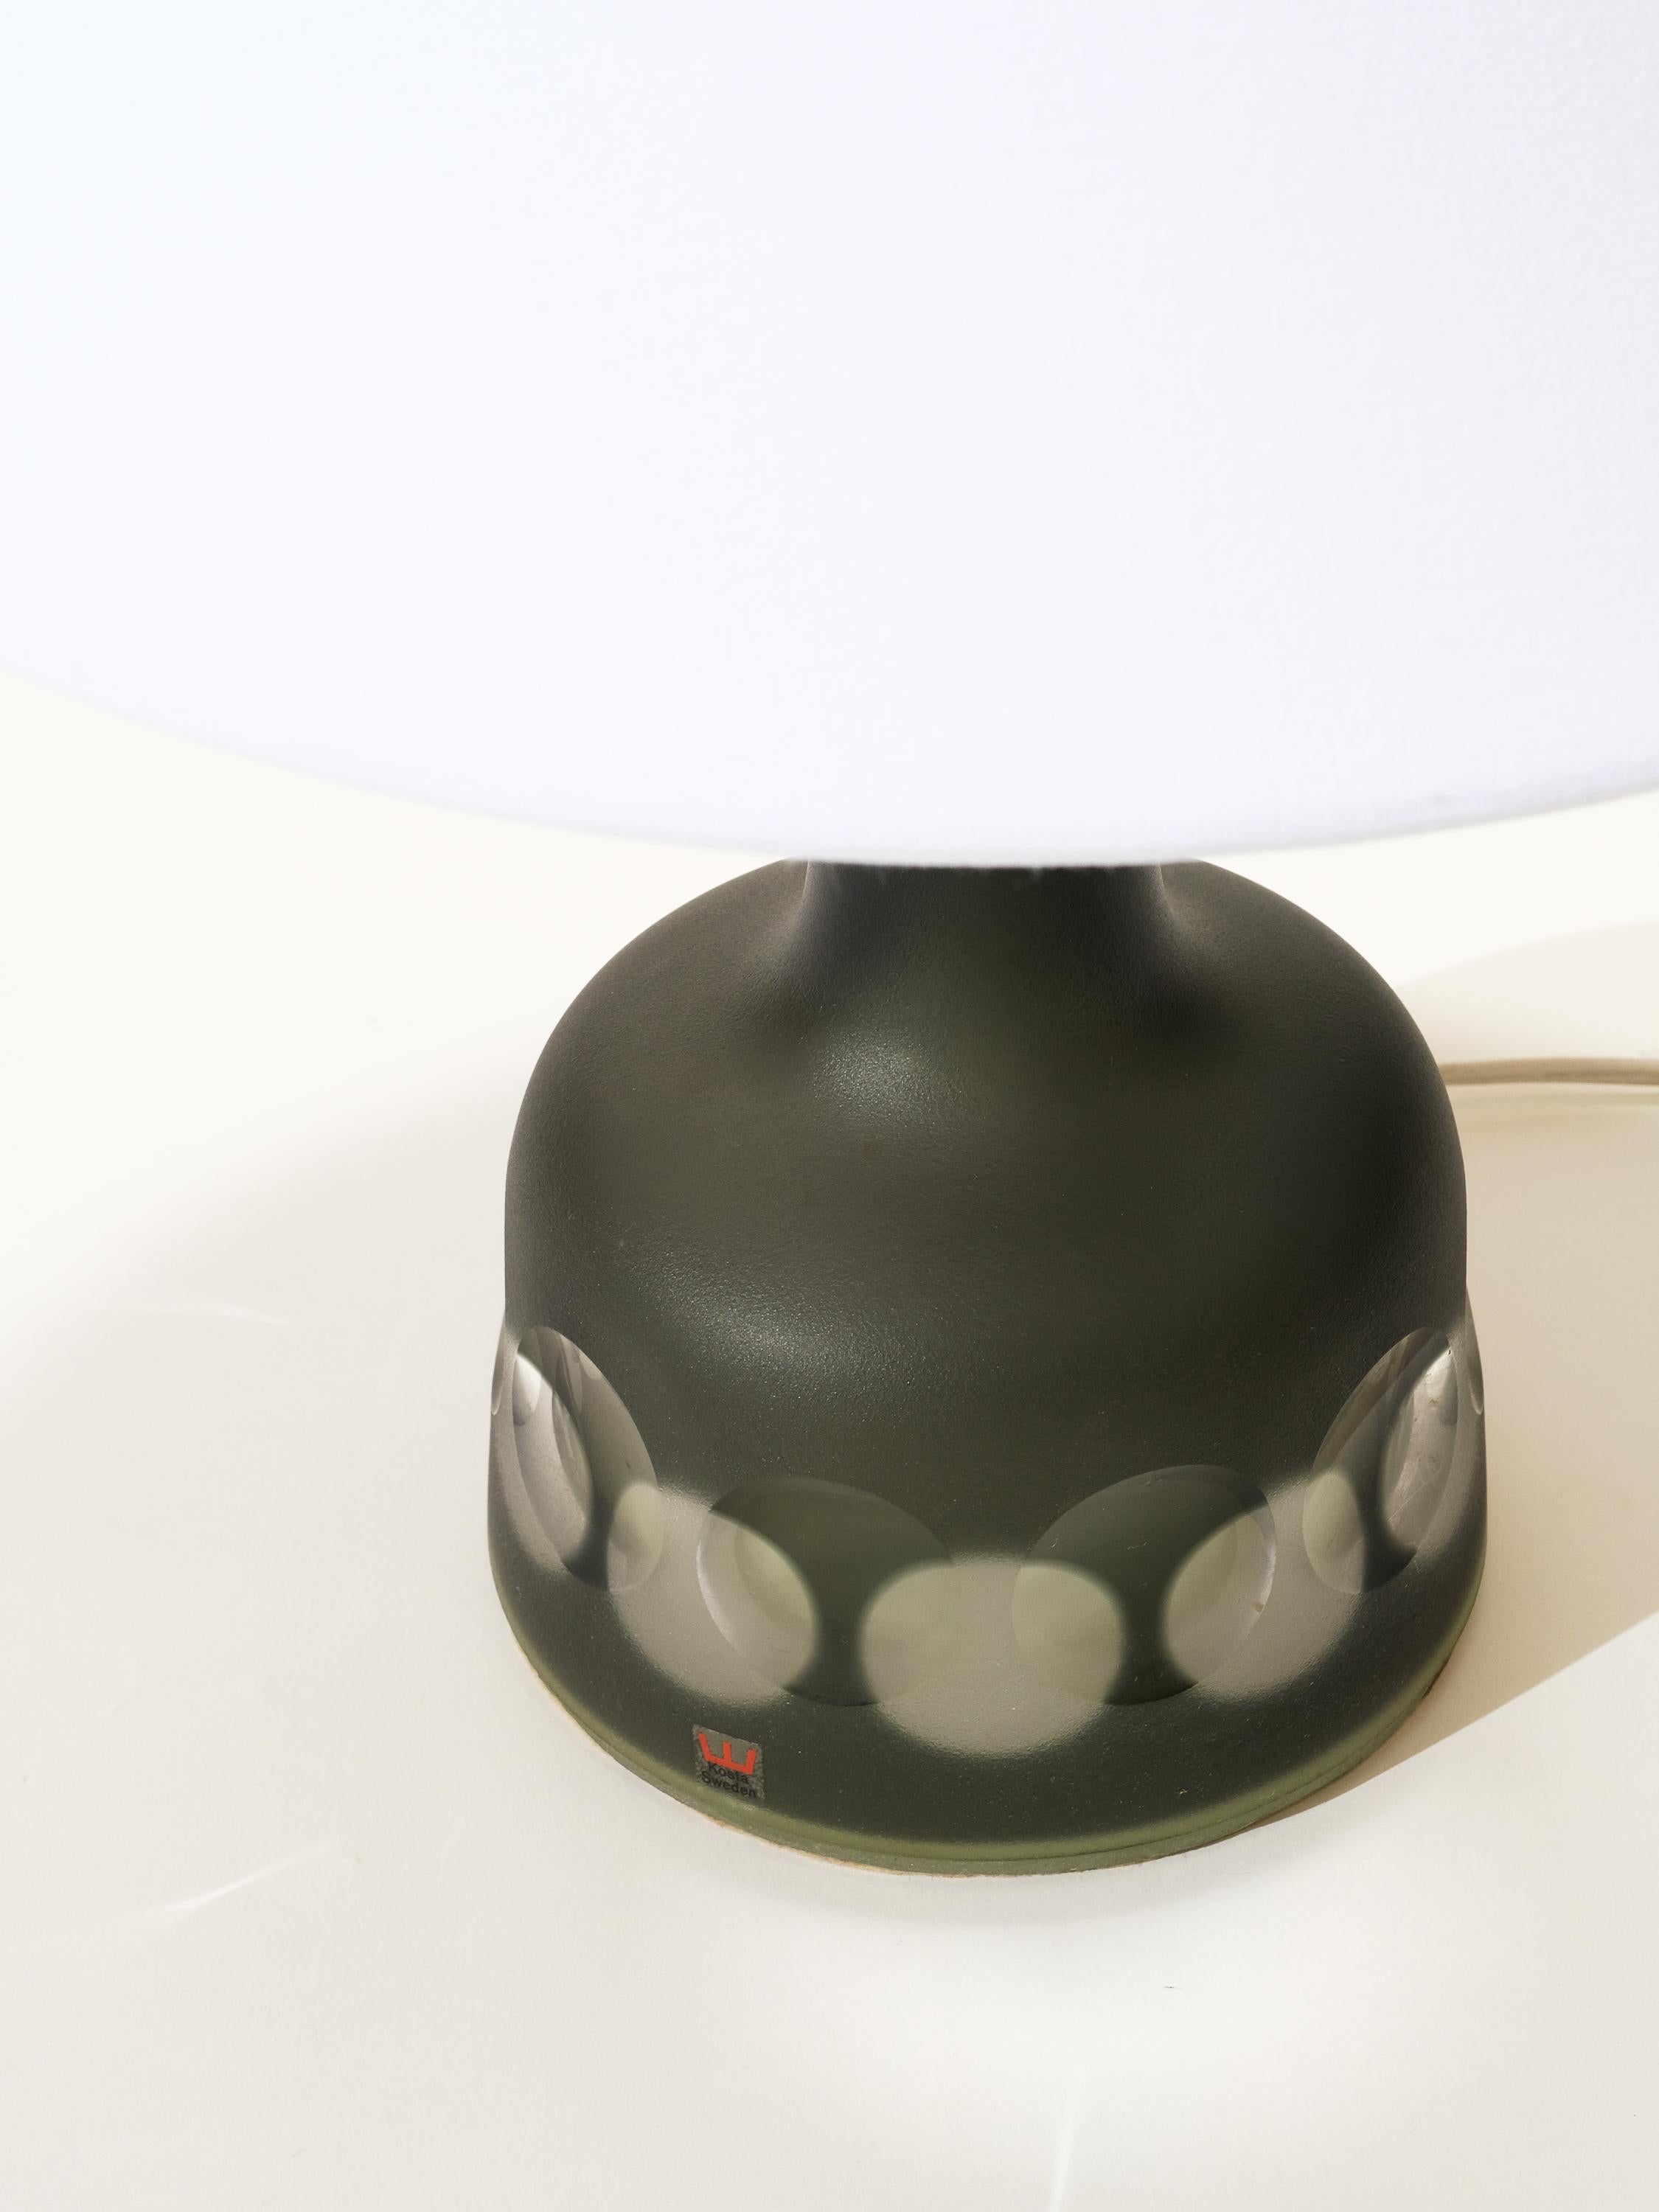 Glass Table Lamp by Ove Sandeberg for Kosta Boda, 1960s In Good Condition For Sale In Helsinki, FI